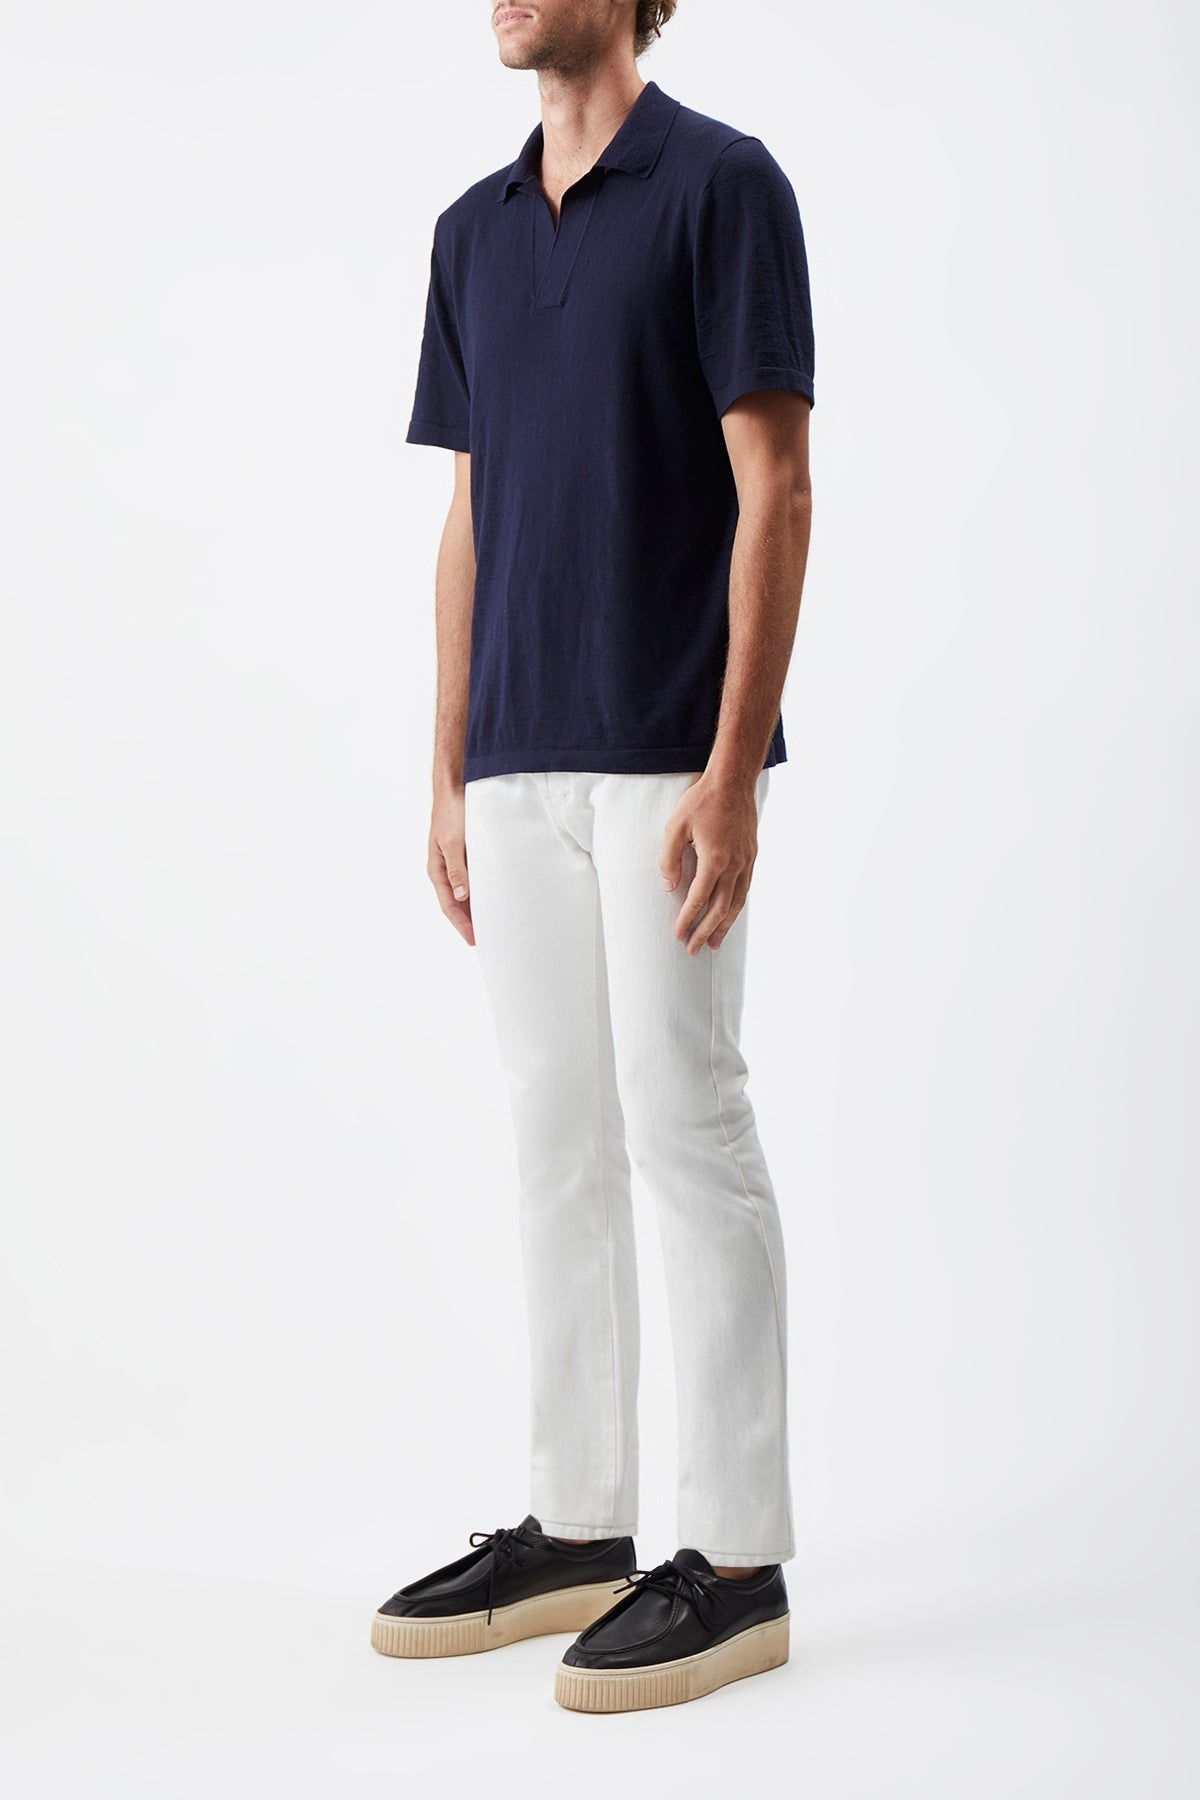 Stendhal Knit Short Sleeve Polo in Navy Cashmere - 3